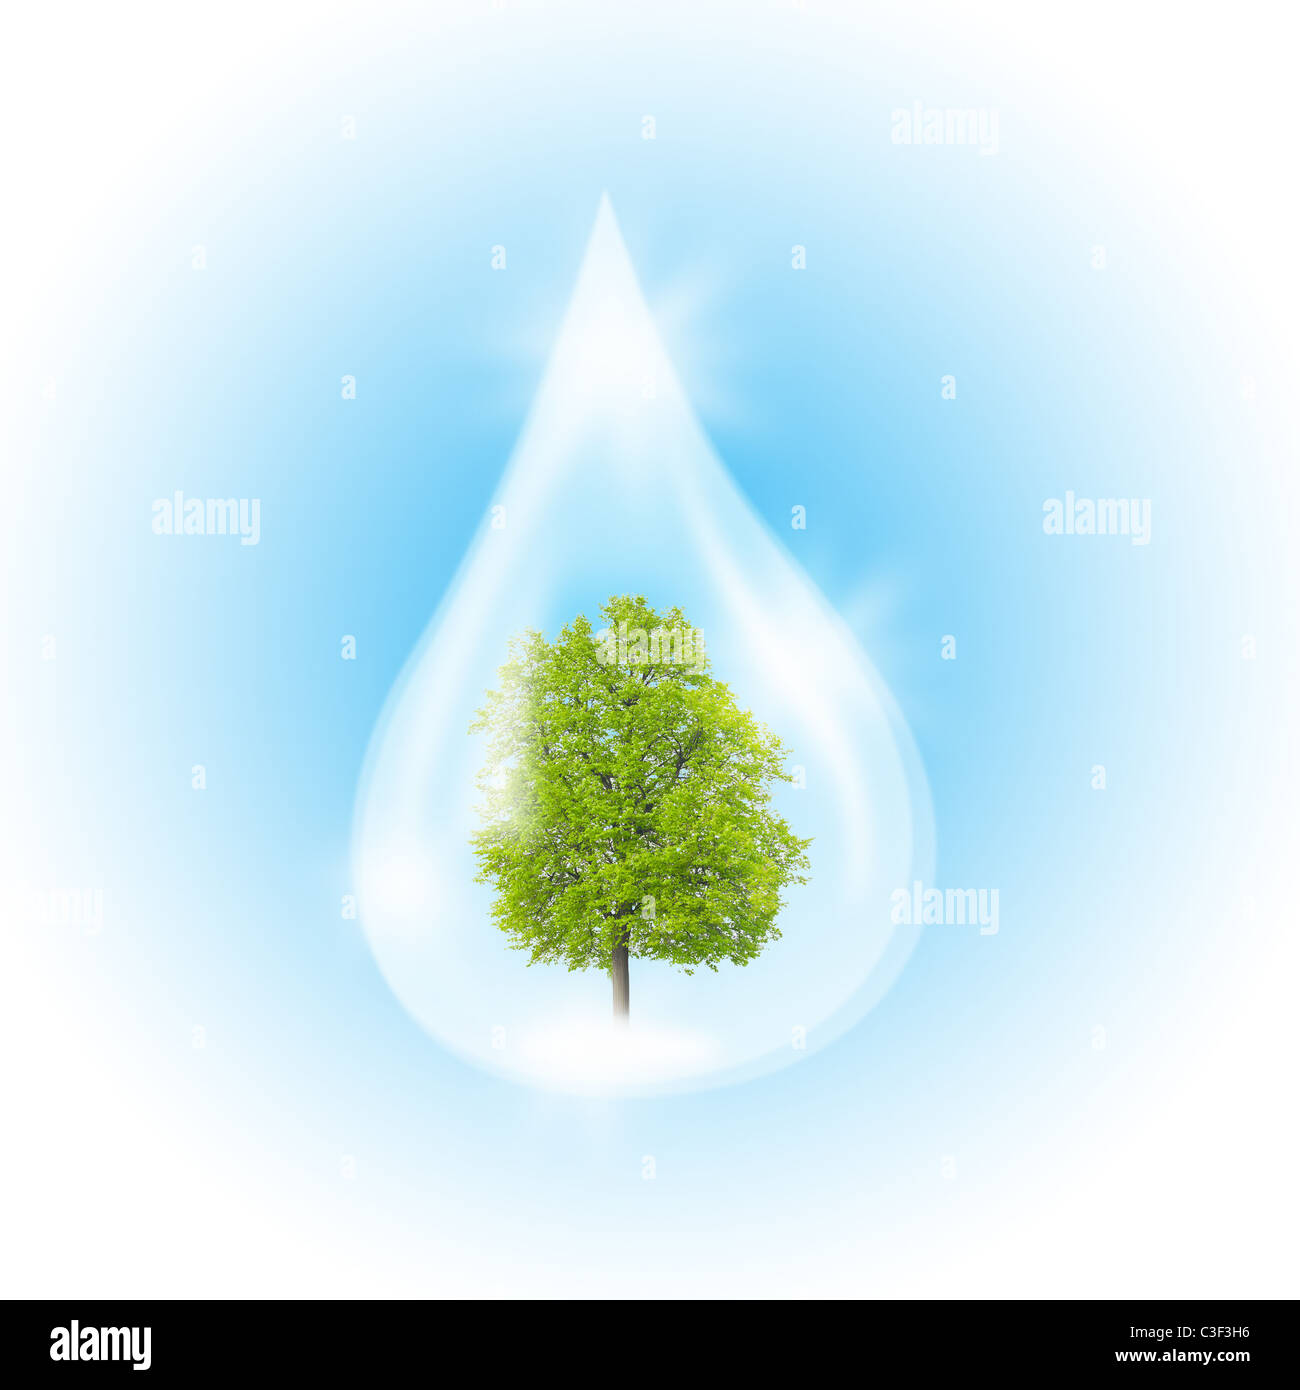 Green Tree inside a clean drop of water as a symbol of environmental protection. Stock Photo